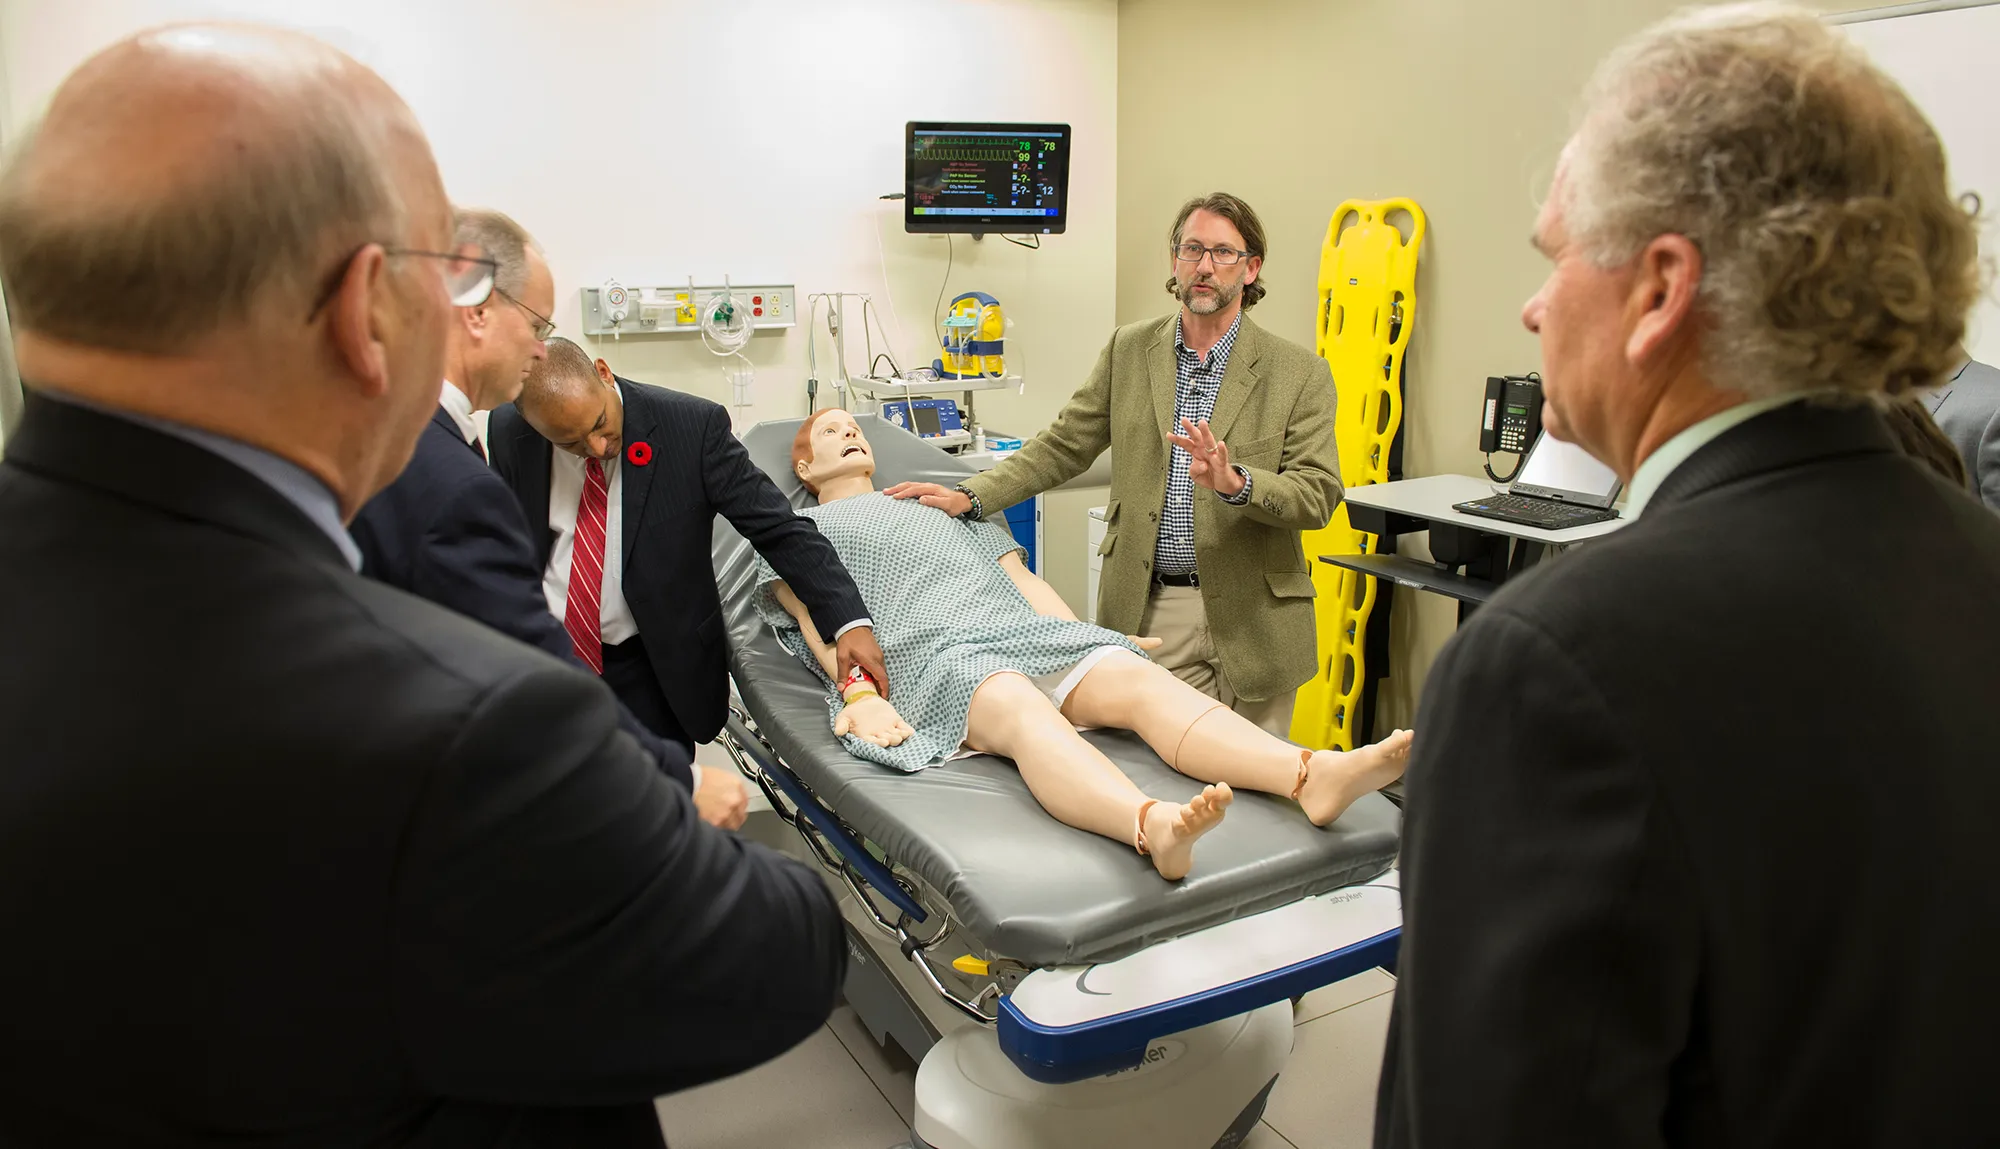 Faculty and staff surround a training manikin in the Sentara Center for Simulation and Immersive Learning at EVMS.